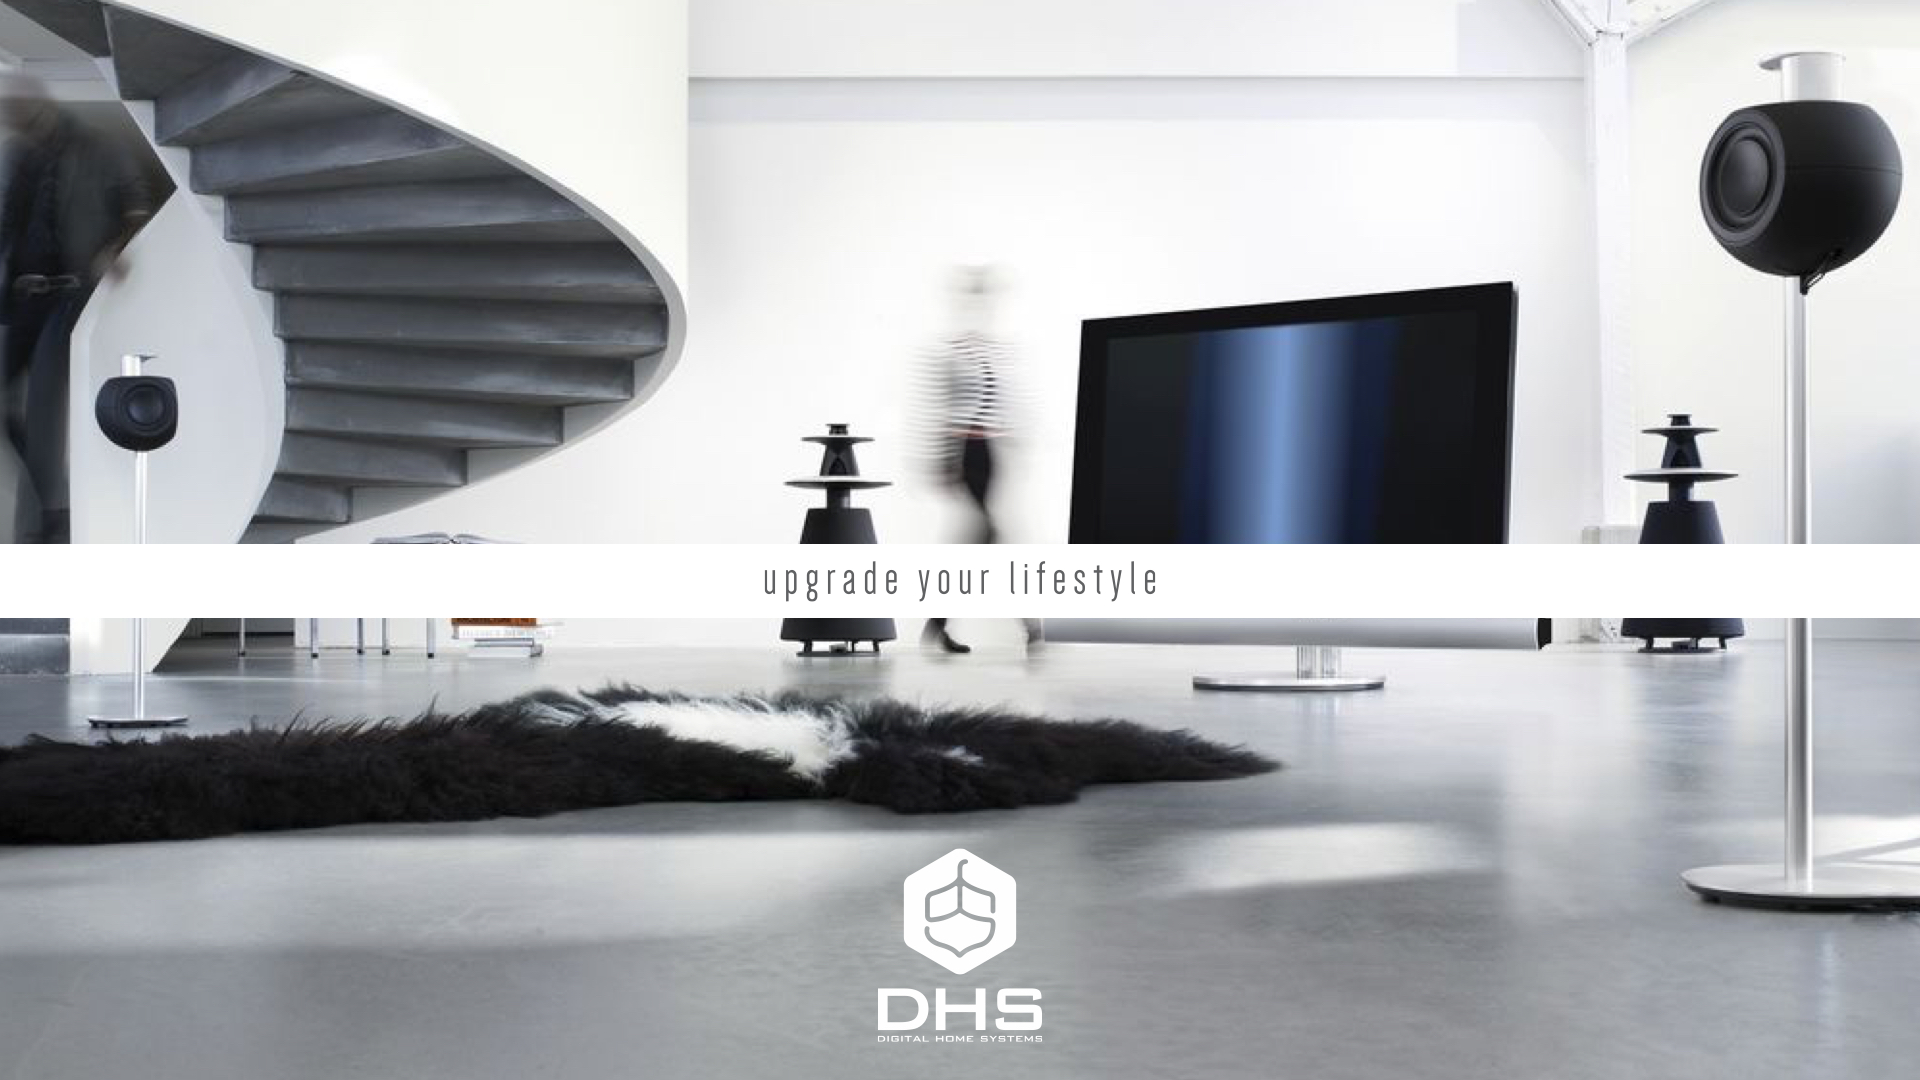 DHS Branding by Dosmaquinas